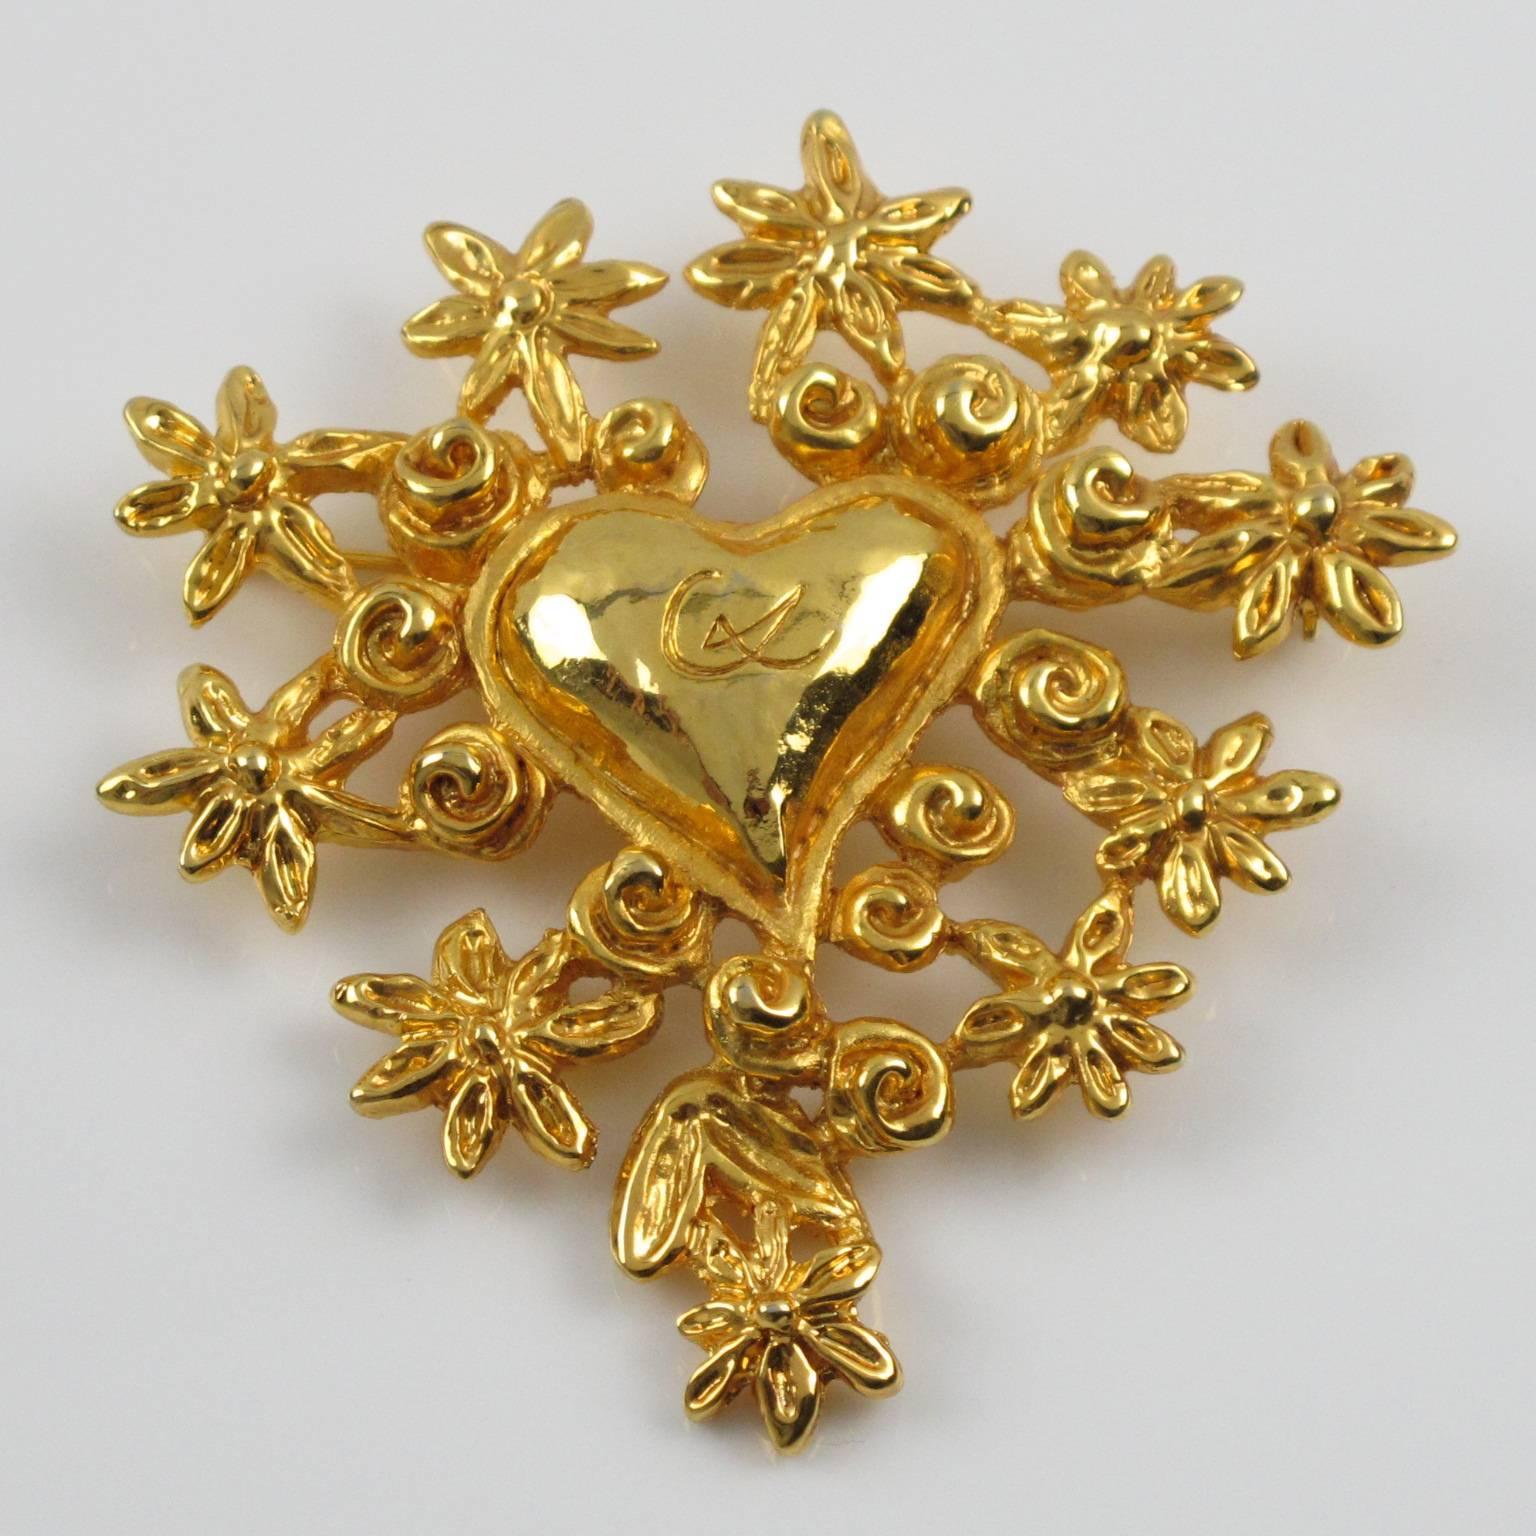 Vintage couture CHRISTIAN LACROIX Paris statement Pin Brooch. Fabulous gilt metal all carved and see thru shape, metal all textured featuring a large heart topped with "CL" logo and surrounded by stylized flowers. Excellent vintage